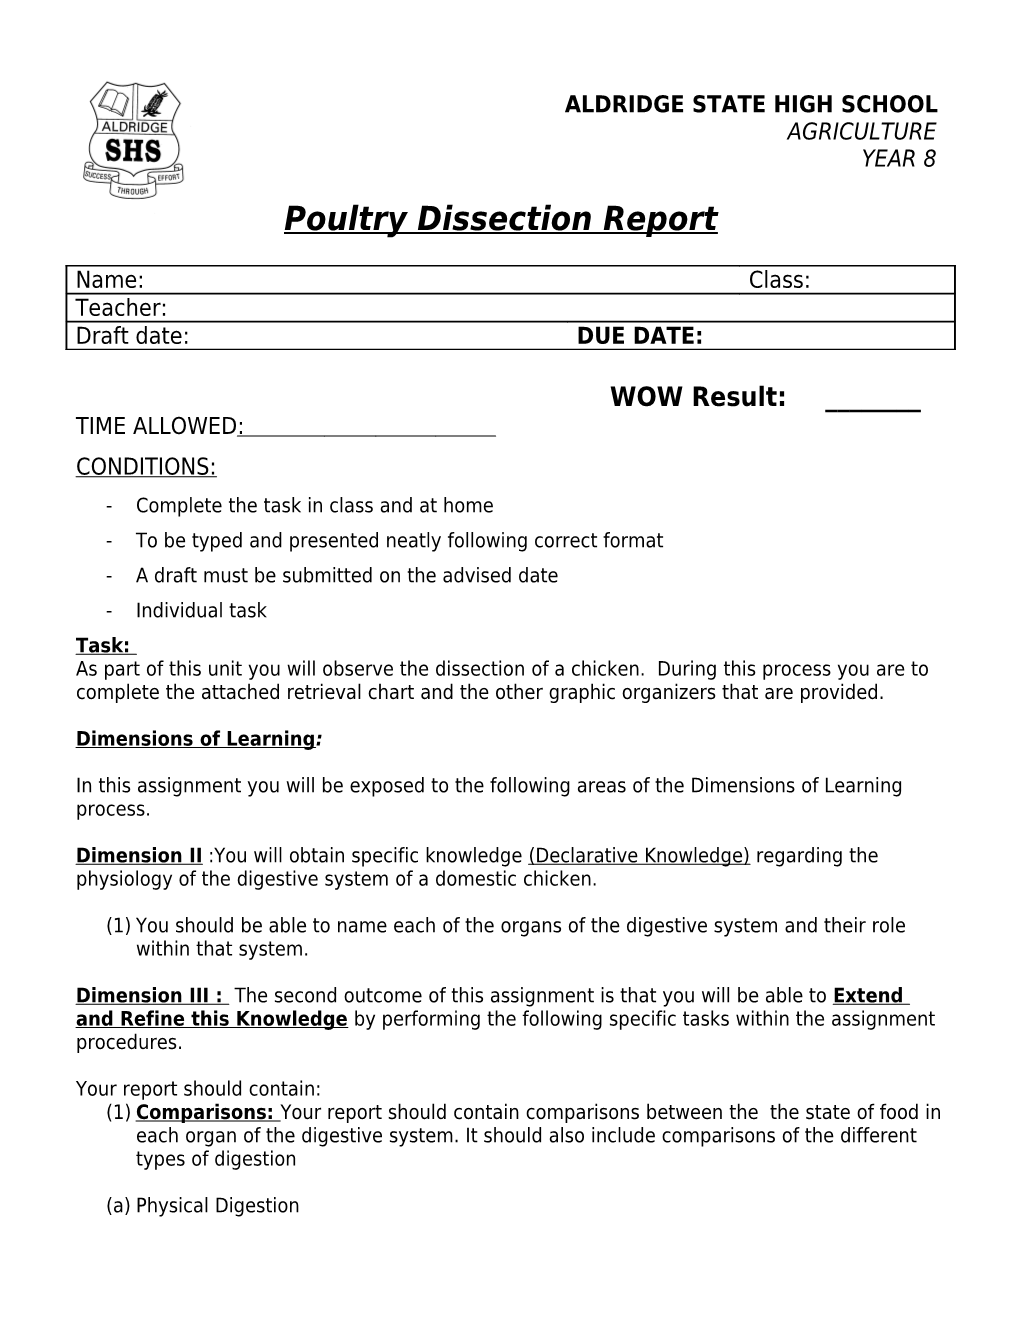 Poultry Dissection Report